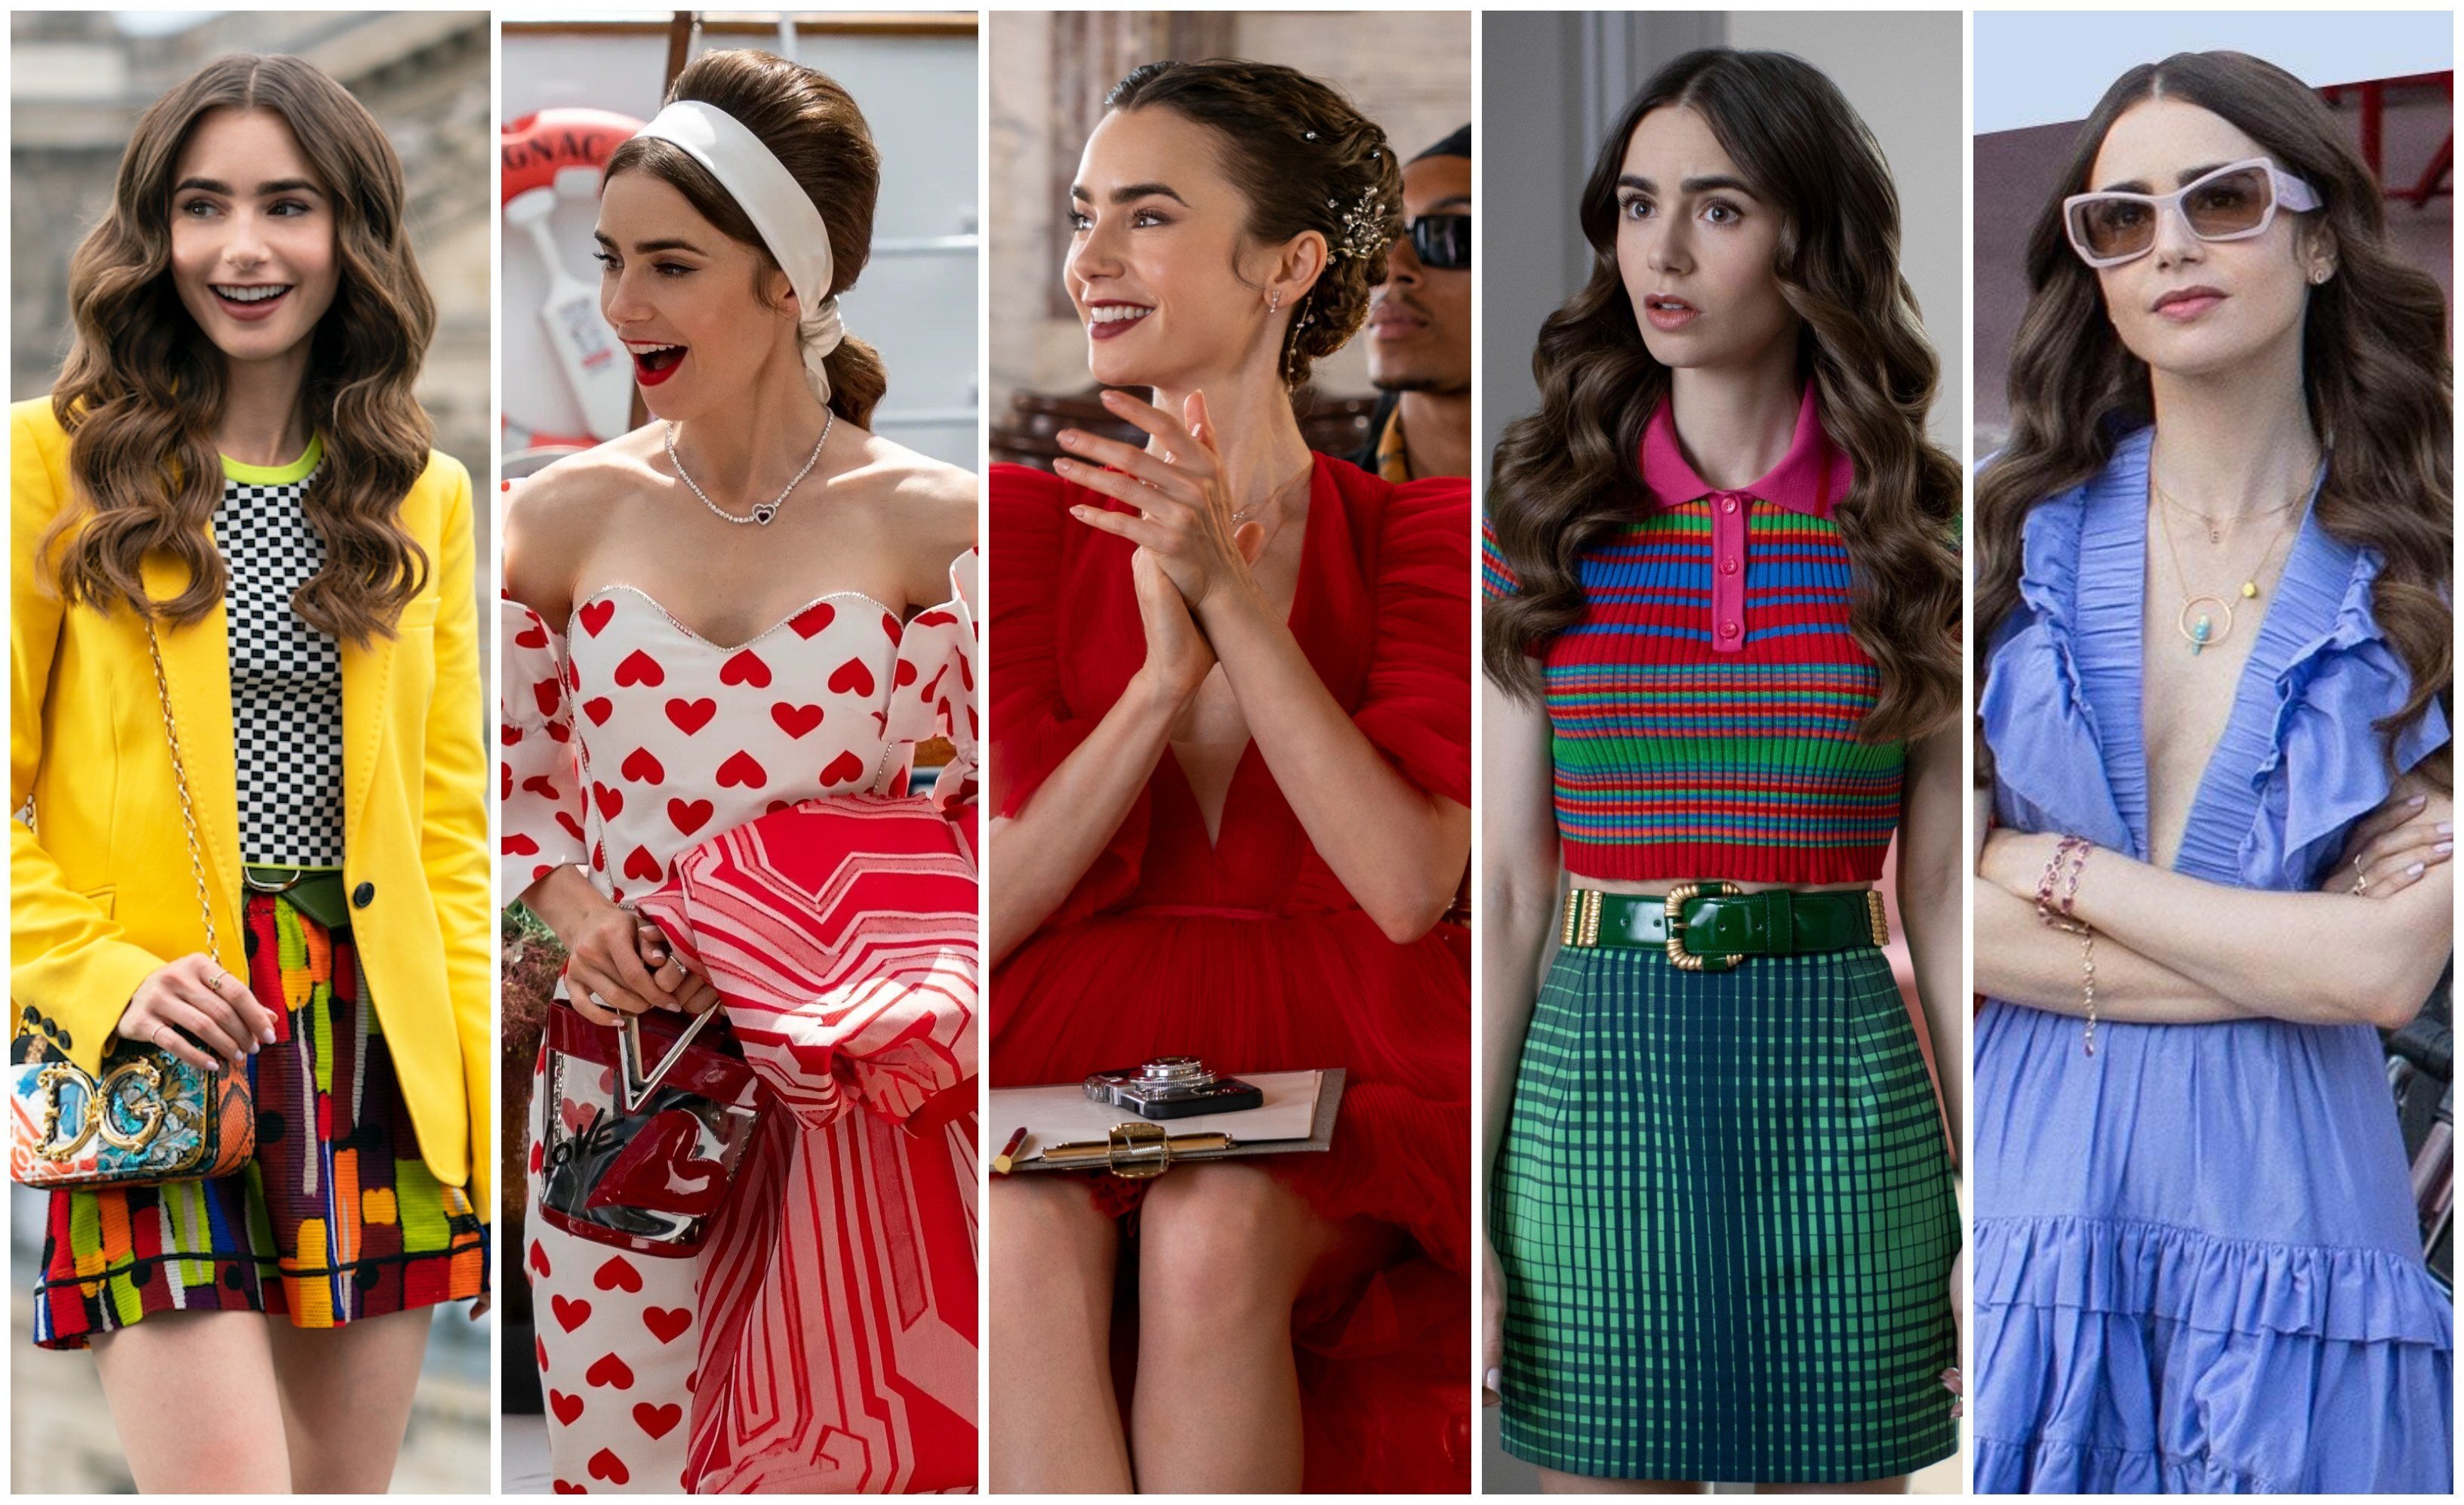 The fashion style of lily collins in emily in paris 2 join the custom or dare to assert your own identity?